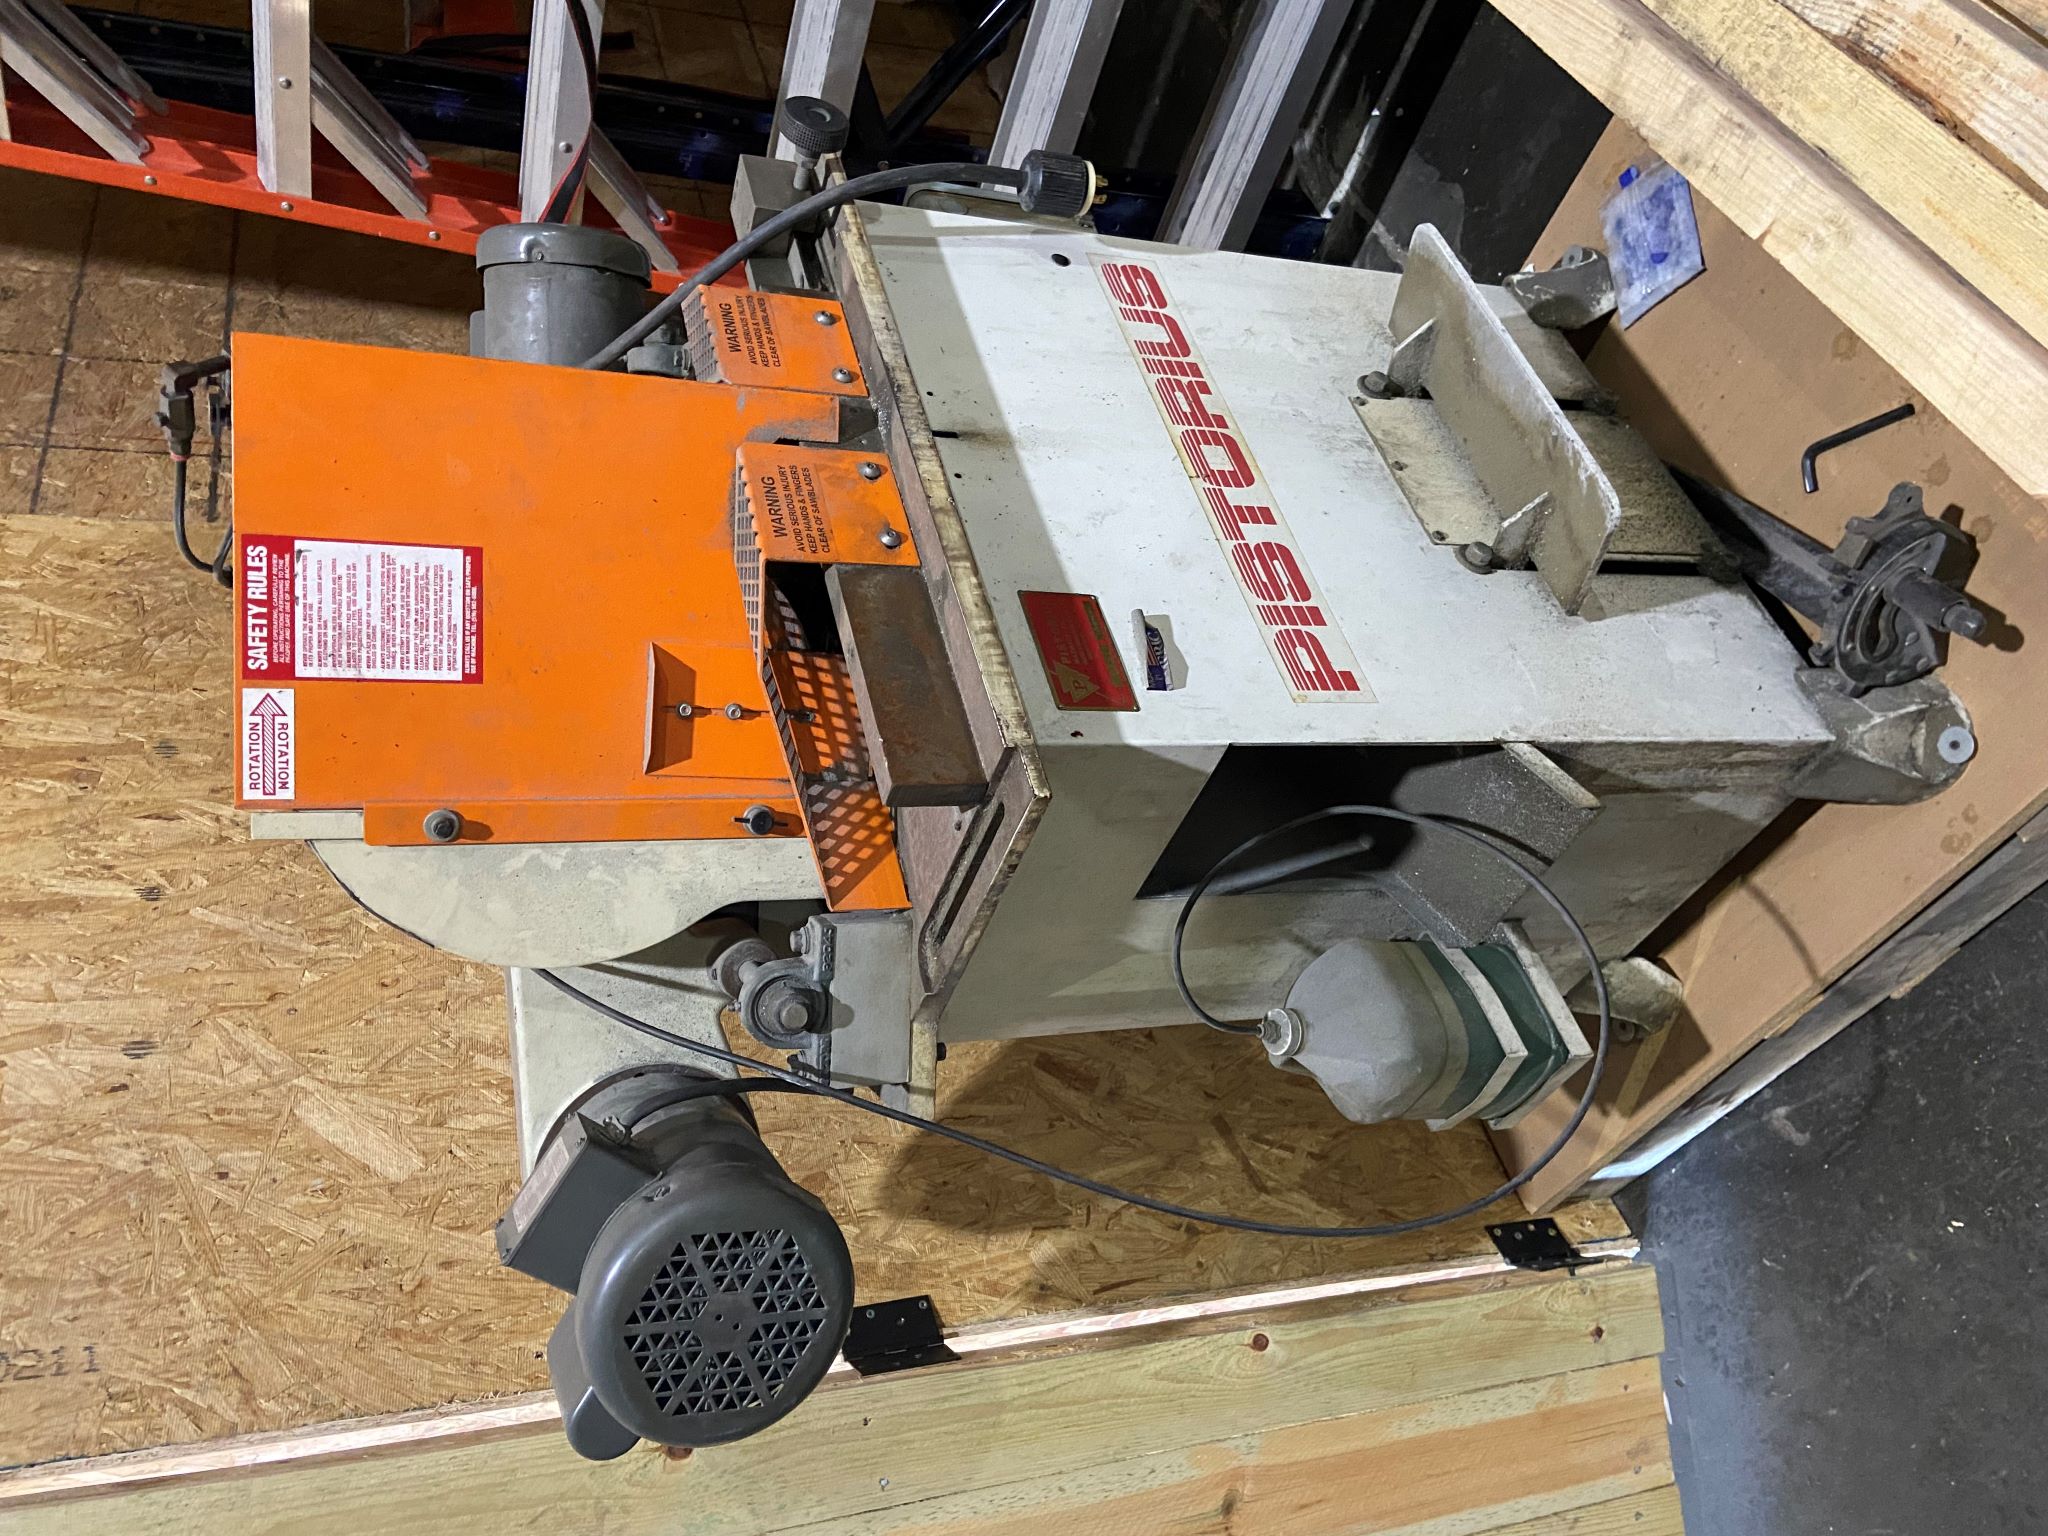 Equipment Lot: Fletcher – Terry Substrate FSC Cutter, Pistorius EMN-14 Double Miter Saw, & Gerber CNC 4×8 Flatbed Router (Used) Item # UE-110121B (Kansas City, KS)